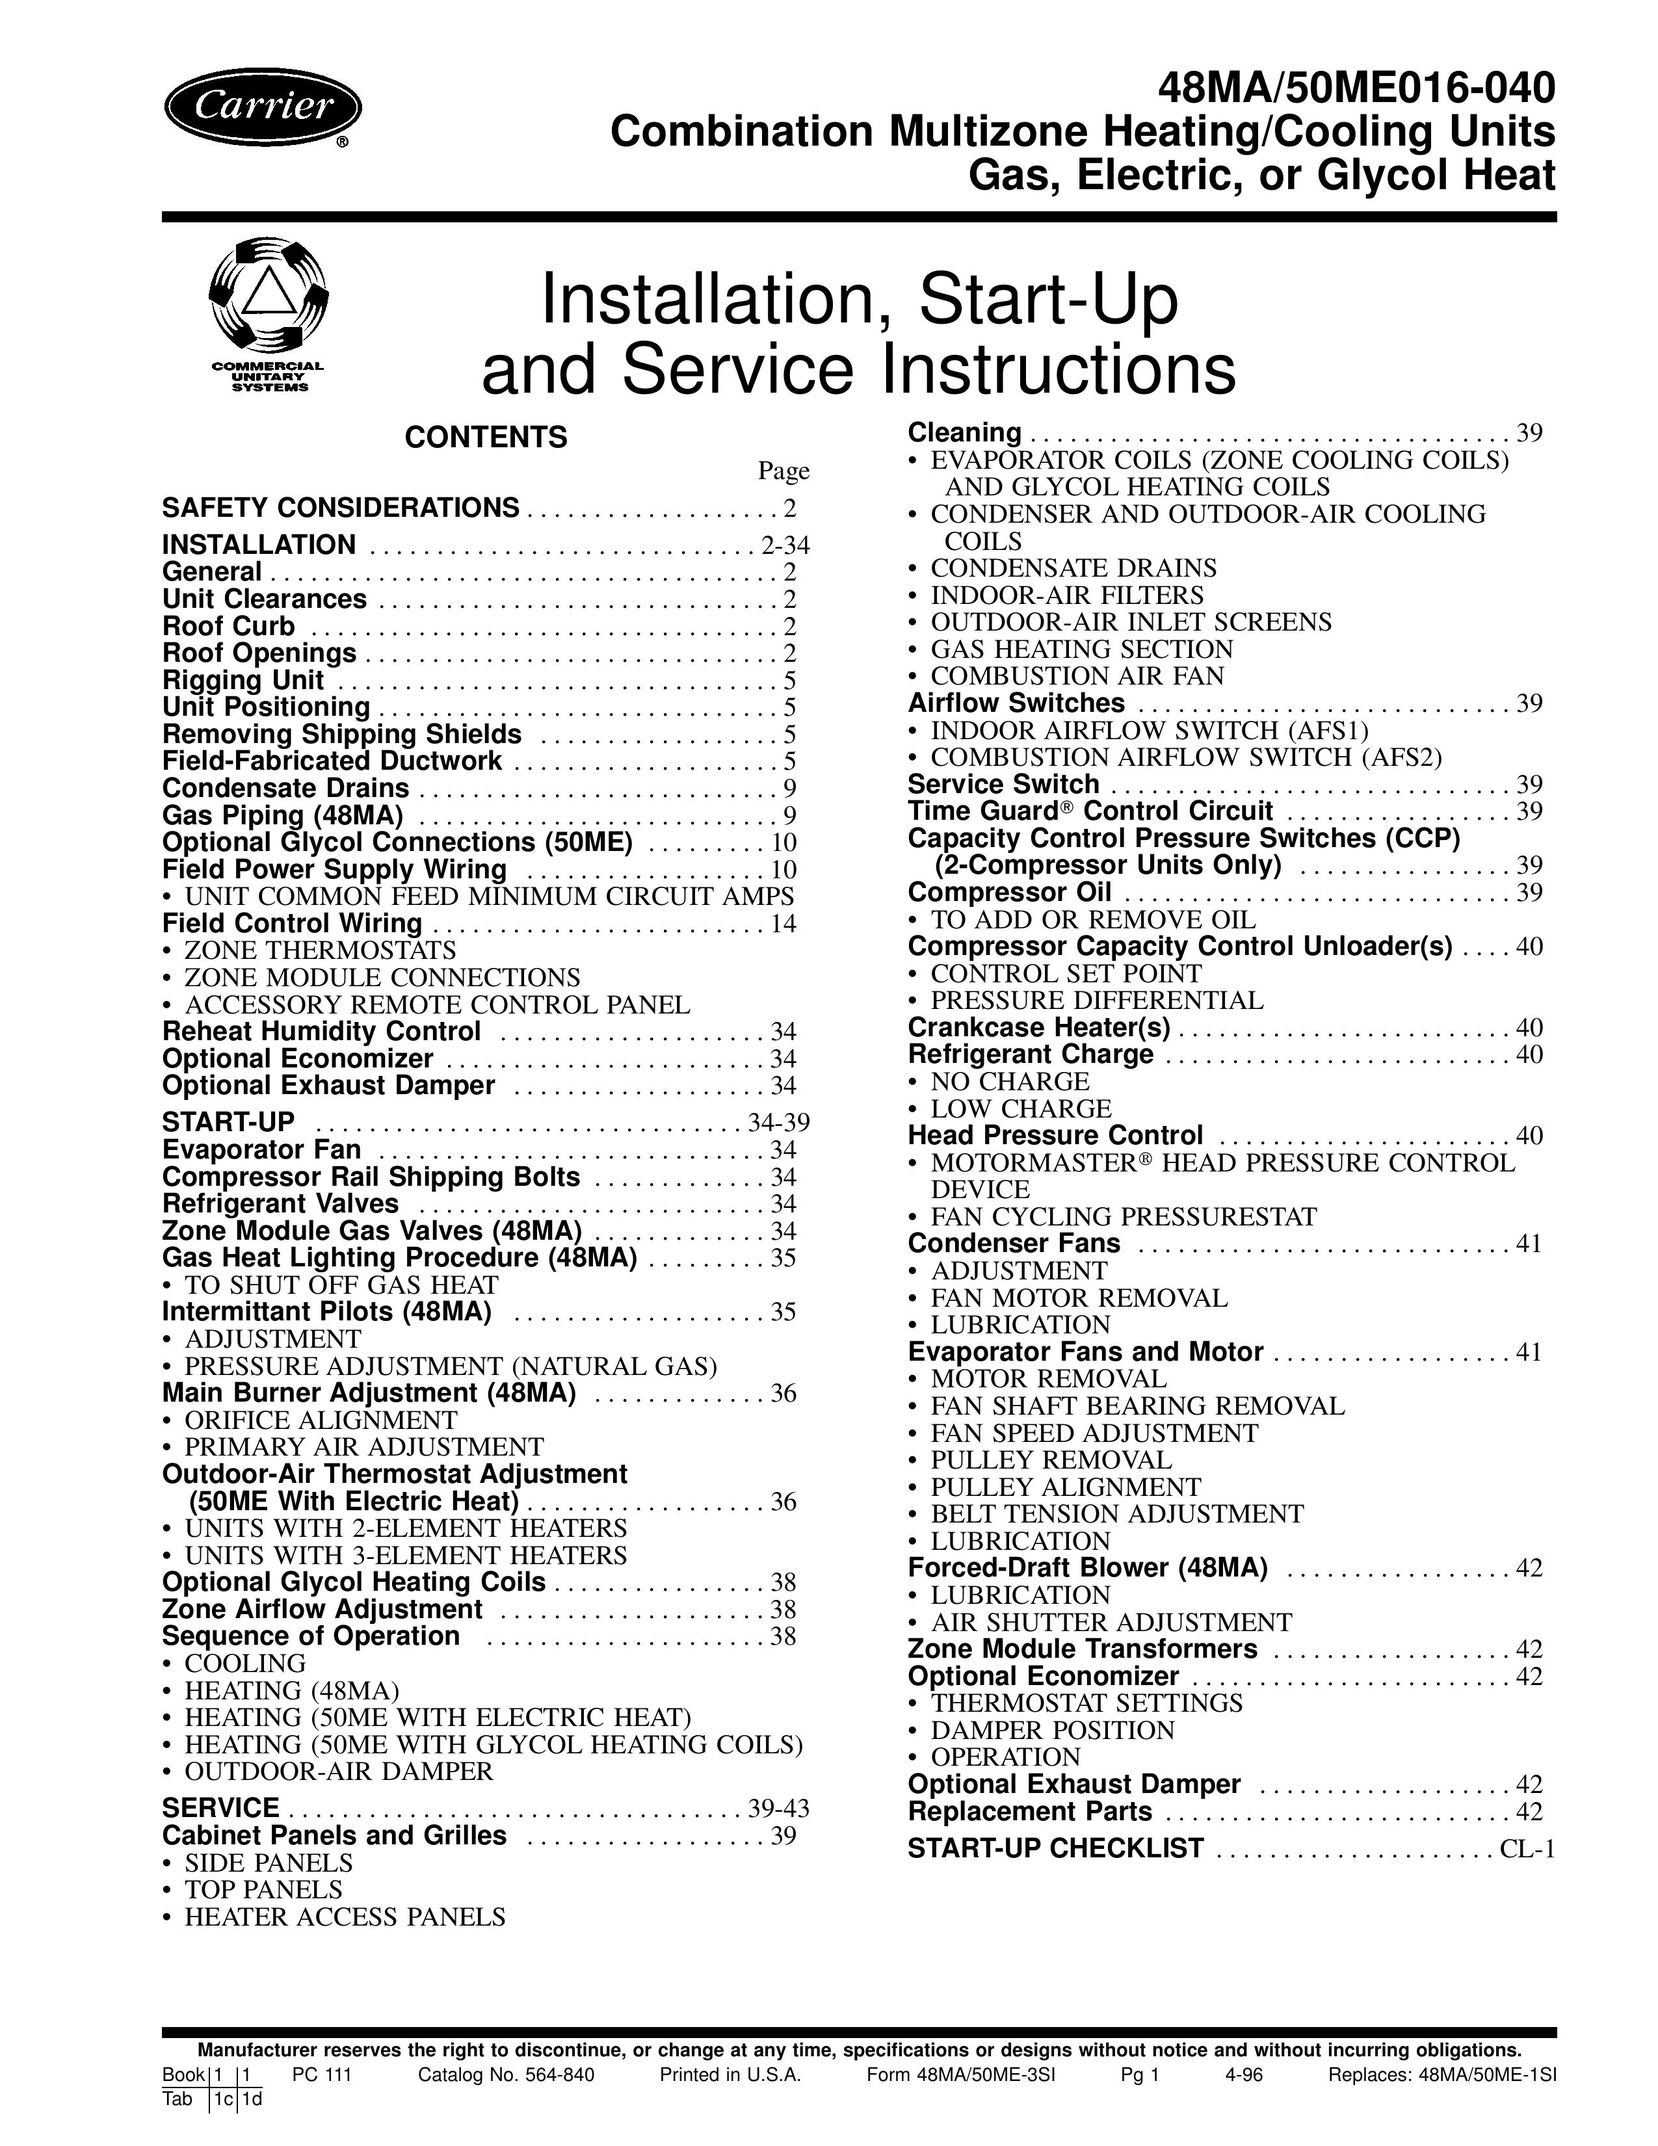 Carrier 48MA/50ME016-040 Heating System User Manual